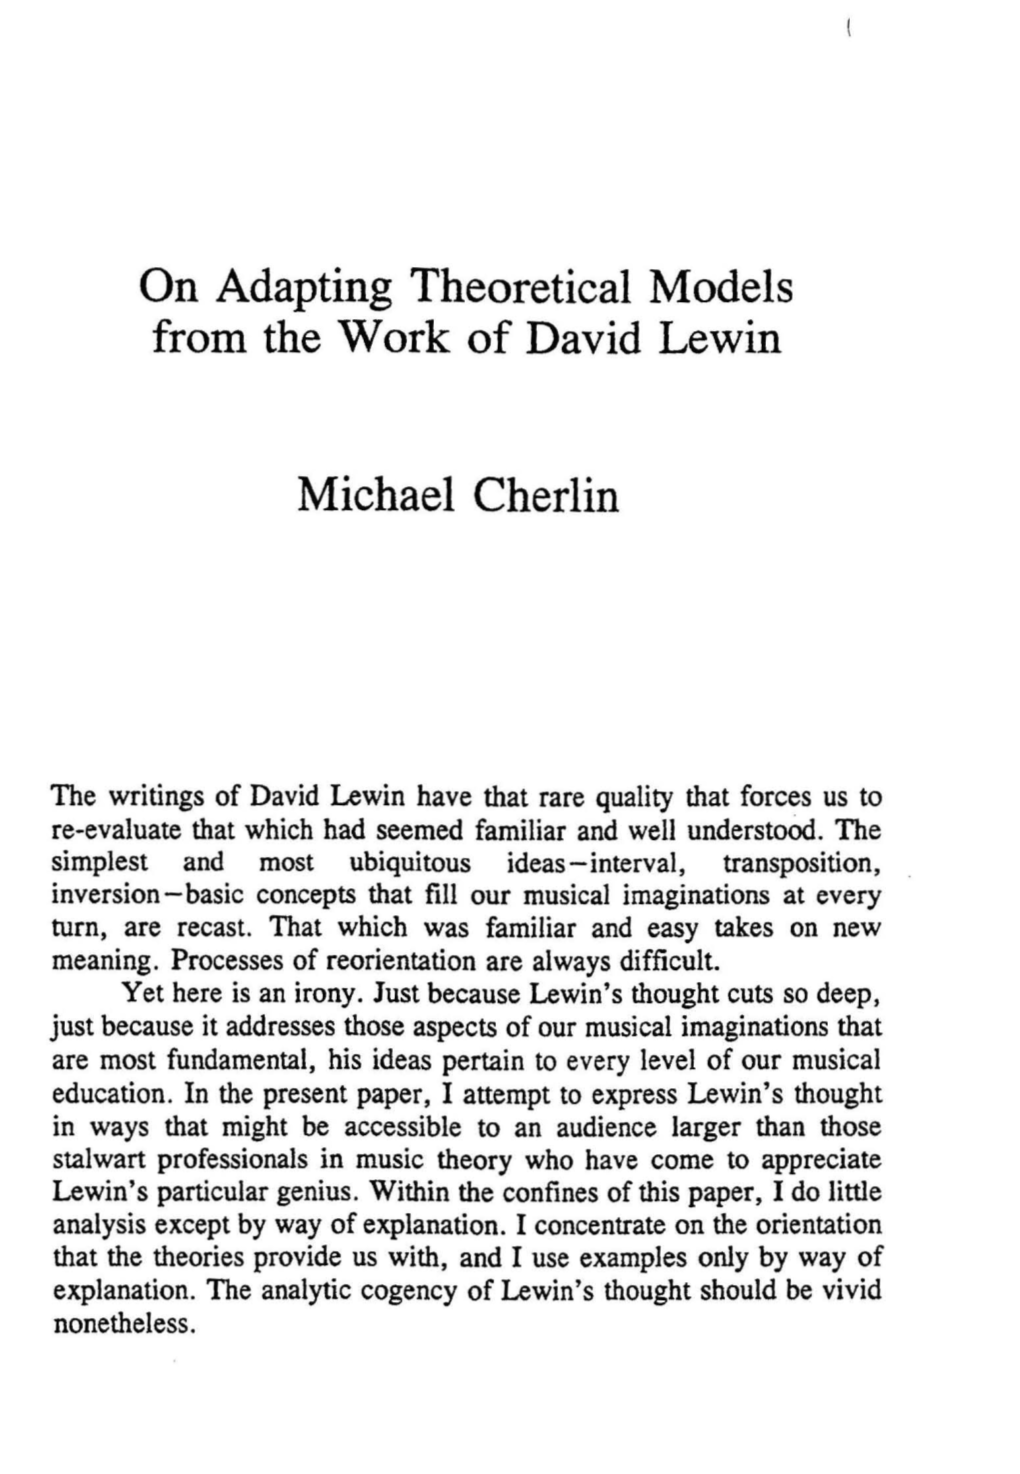 On Adapting Theoretical Models from the Work of David Lewin